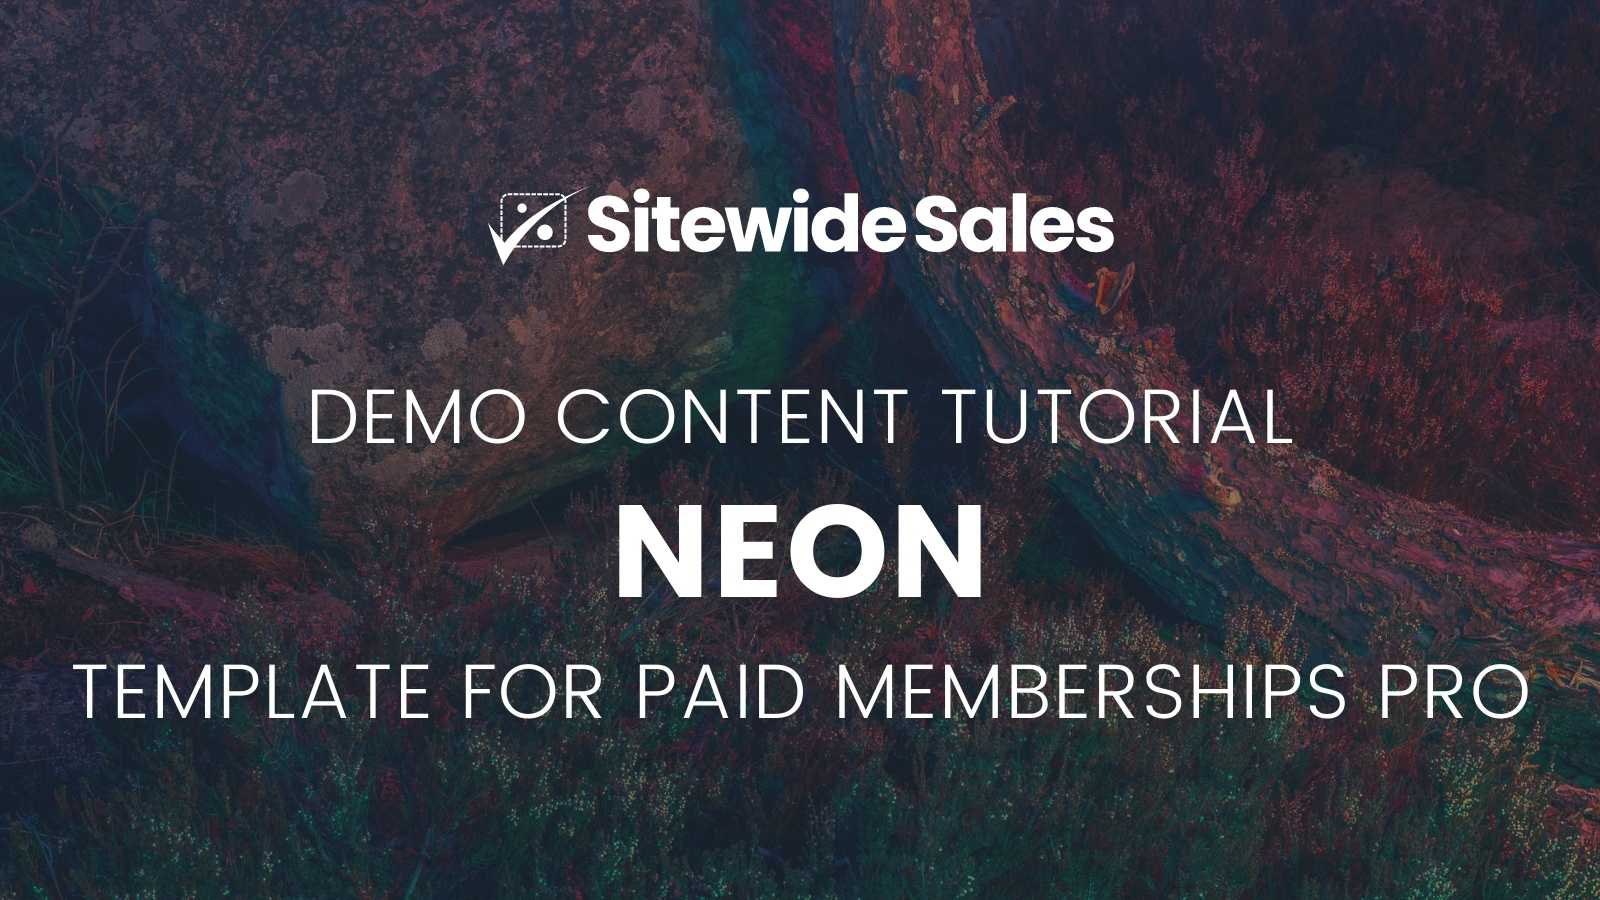 Neon Template for Paid Memberships Pro: Sitewide Sale Demo Content